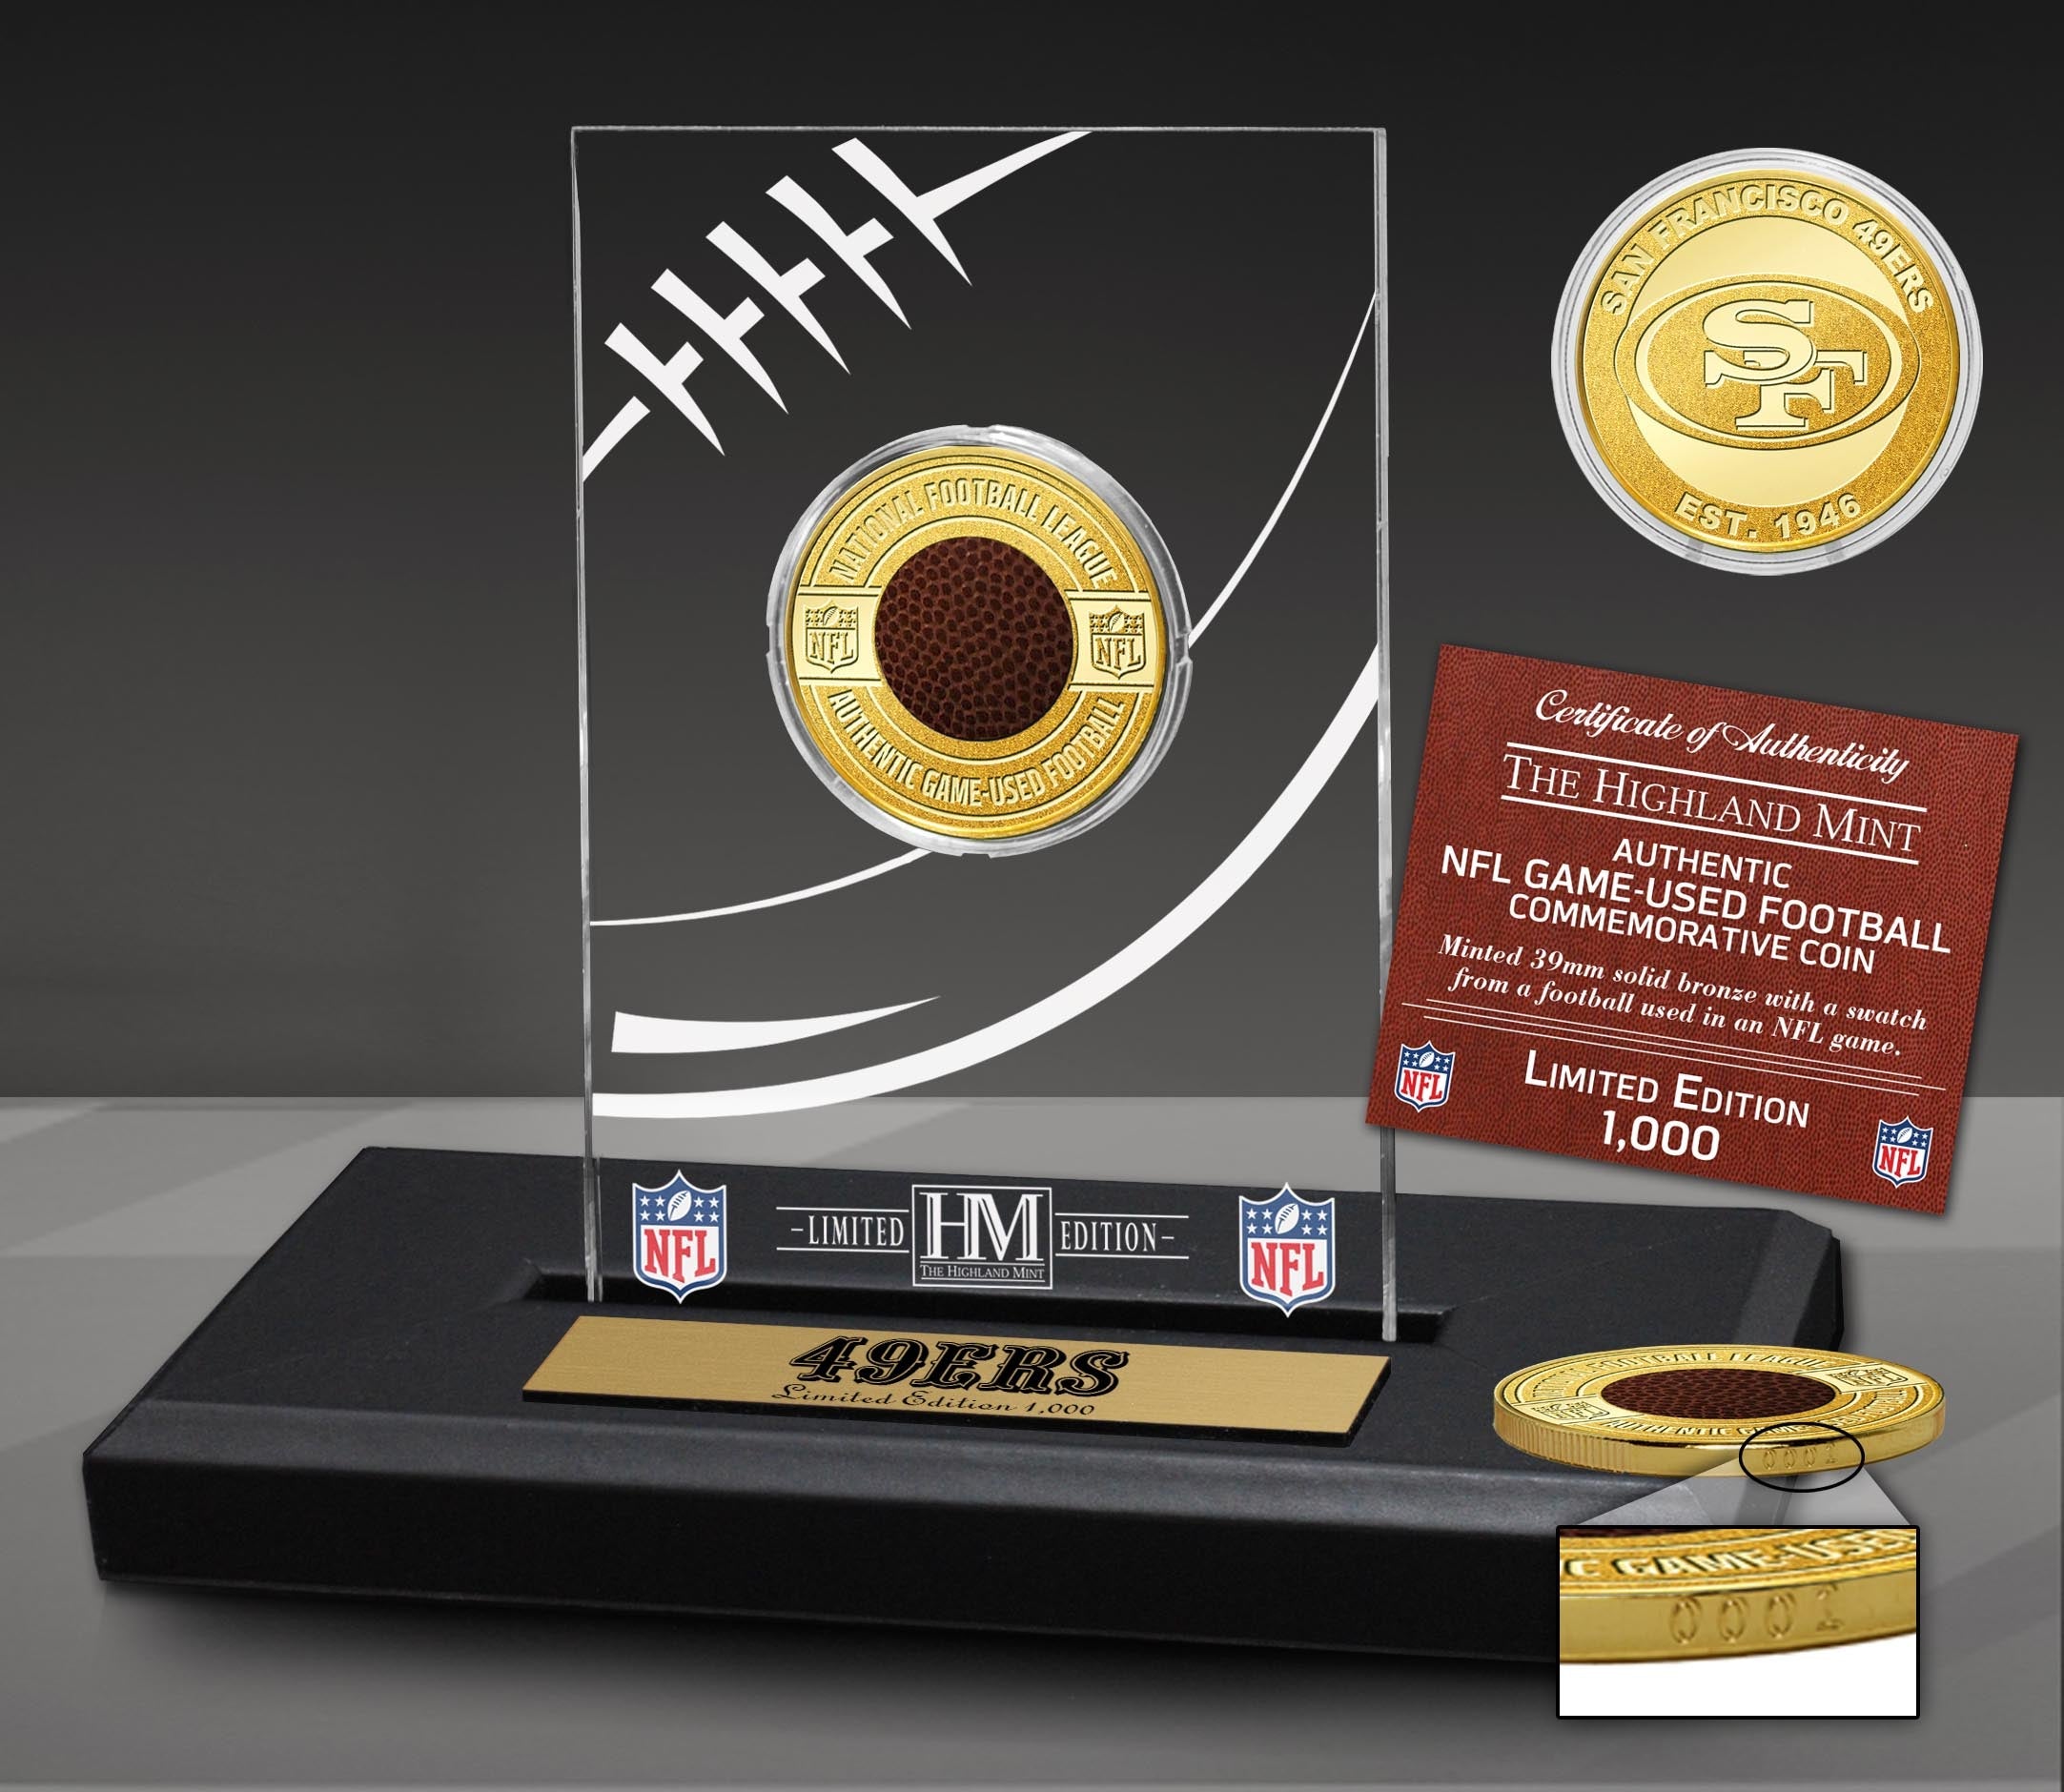 San Francisco 49ers Game Used NFL Football Bronze Coin in Commemorative Display